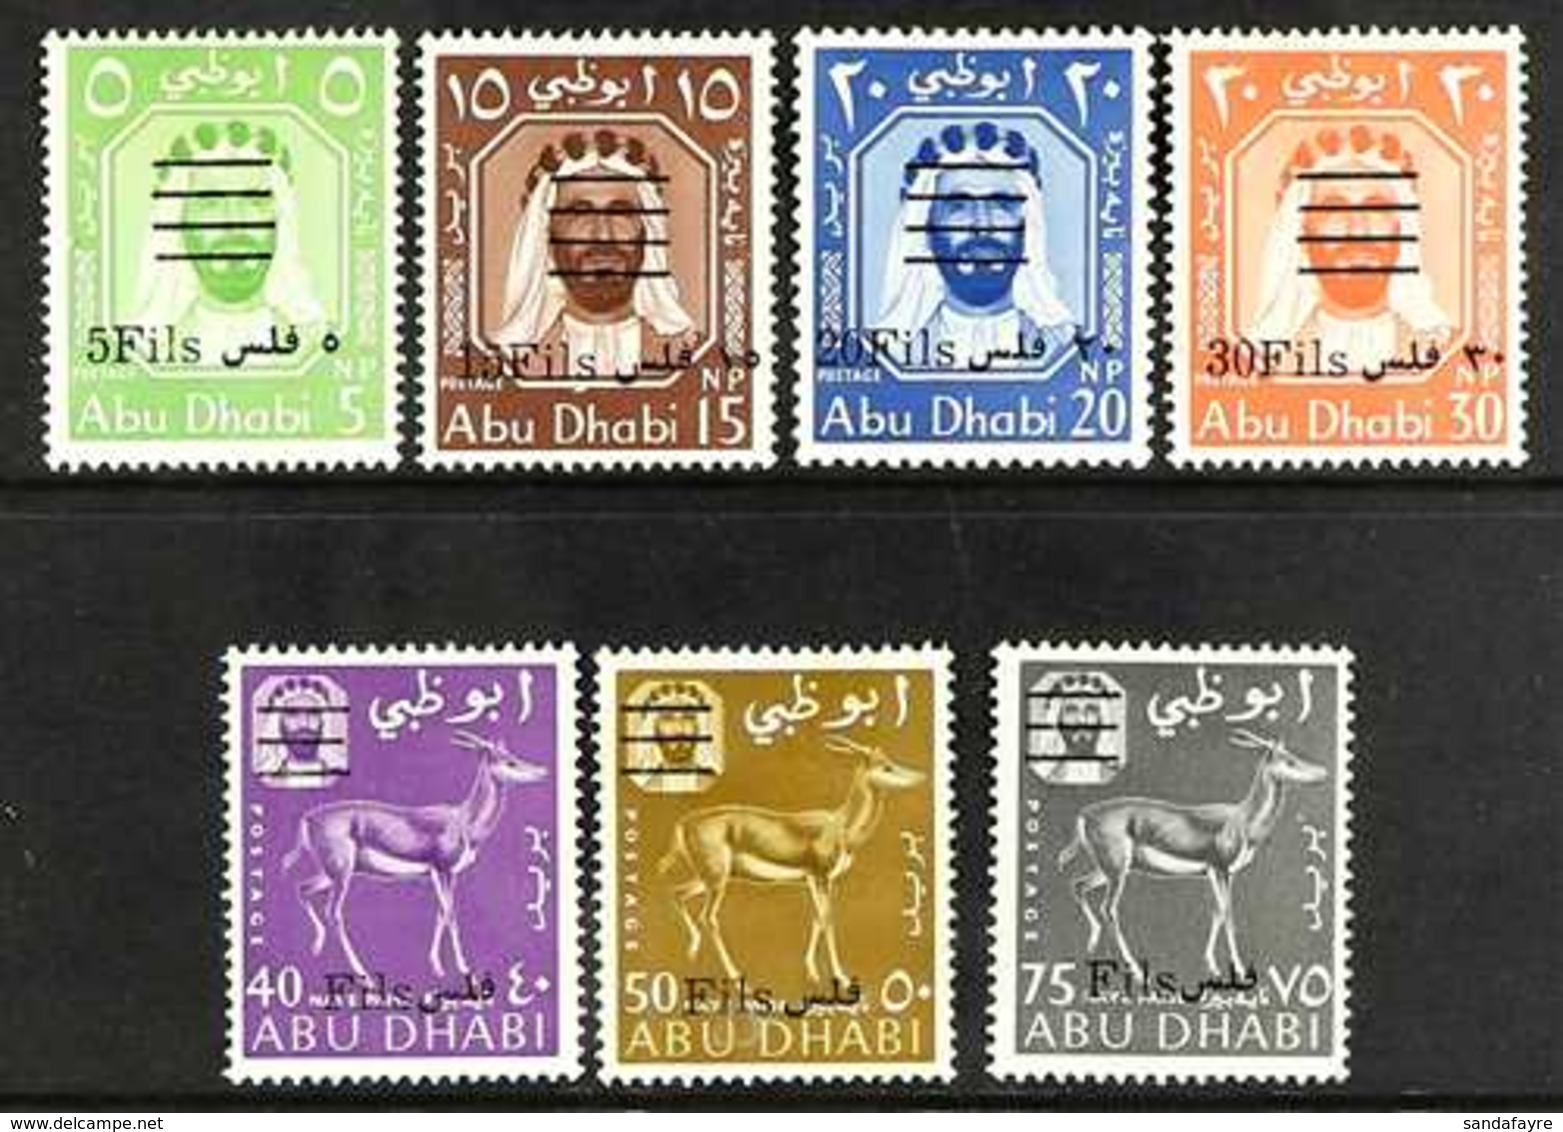 1966 Surcharges Set Complete To 75f On 75np, SG 15/21, Very Fine Mint. Cat £209 (7 Stamps) For More Images, Please Visit - Abu Dhabi